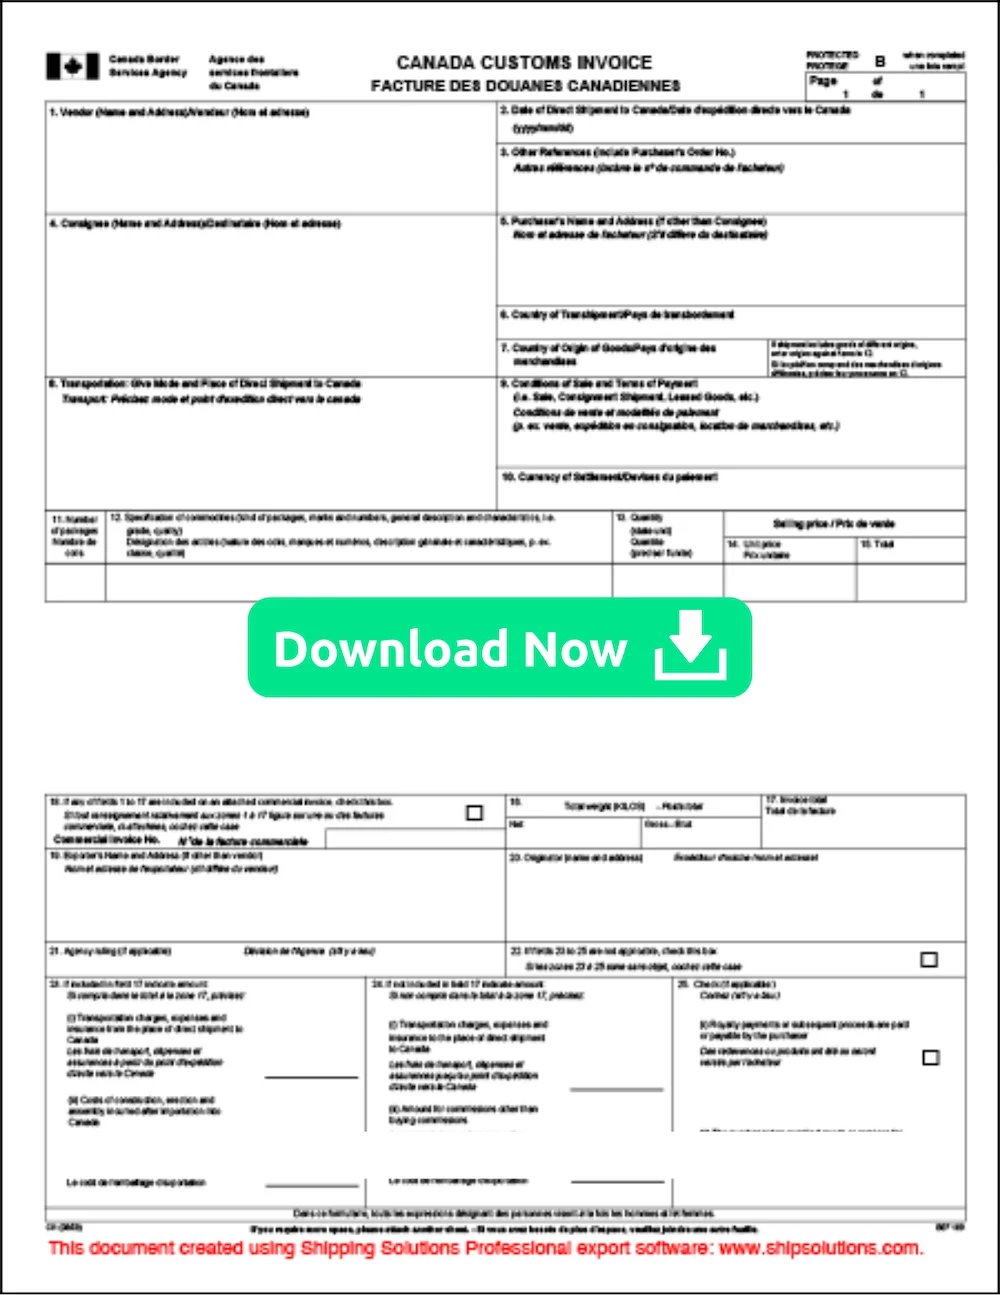 Canada Customs Invoice | Download Now